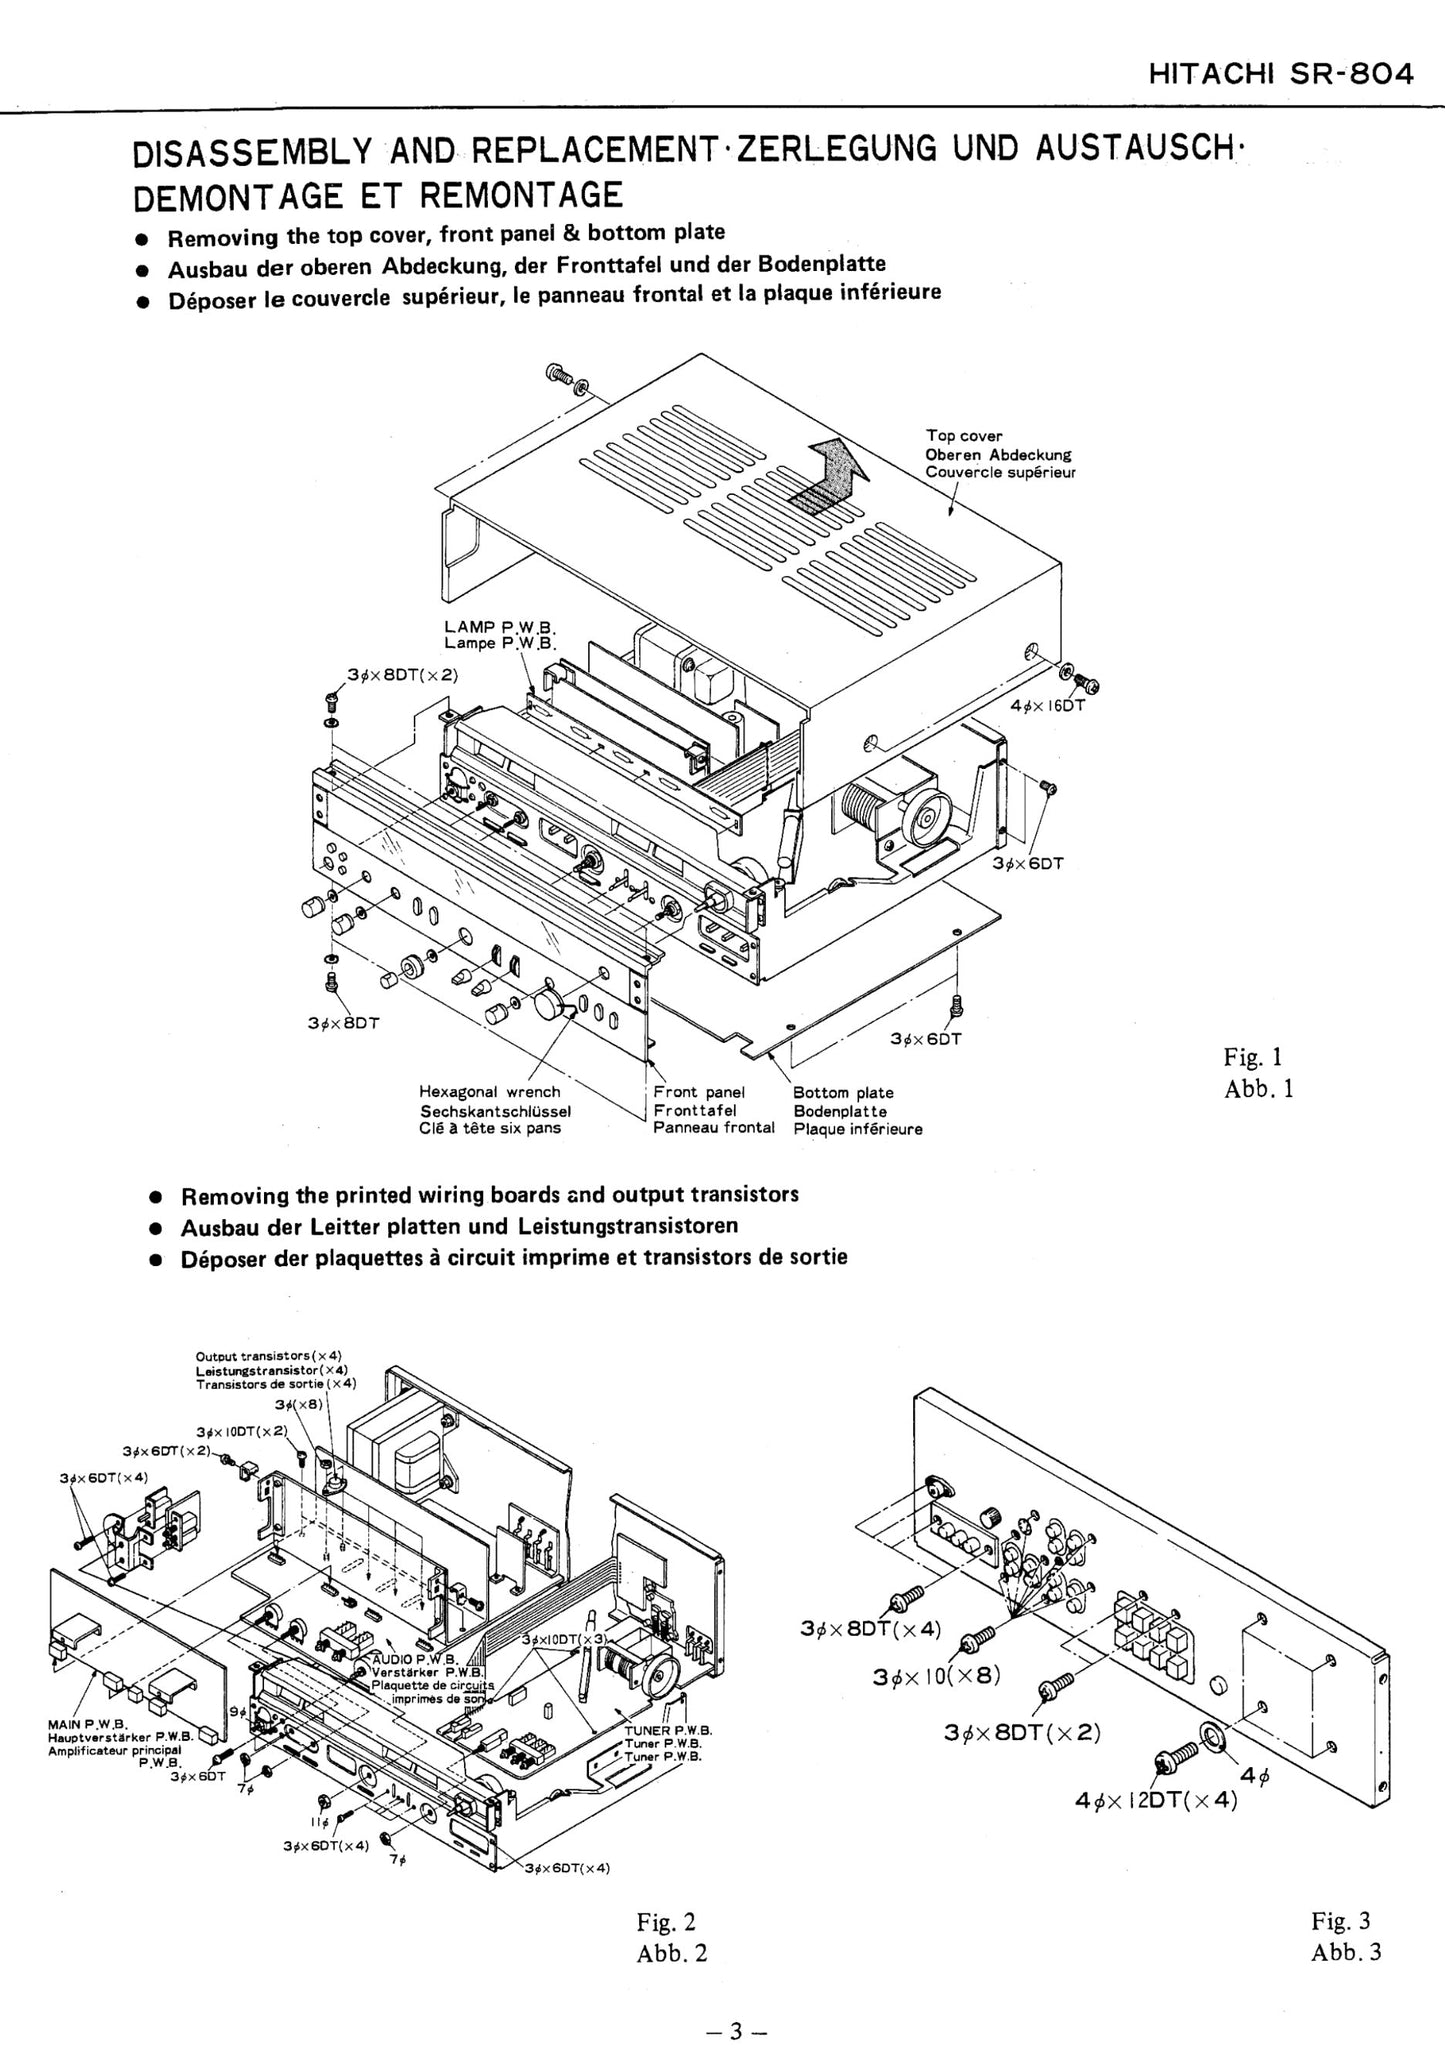 Hitachi SR-804 Stereo Receiver Service Manual (Pages: 25)